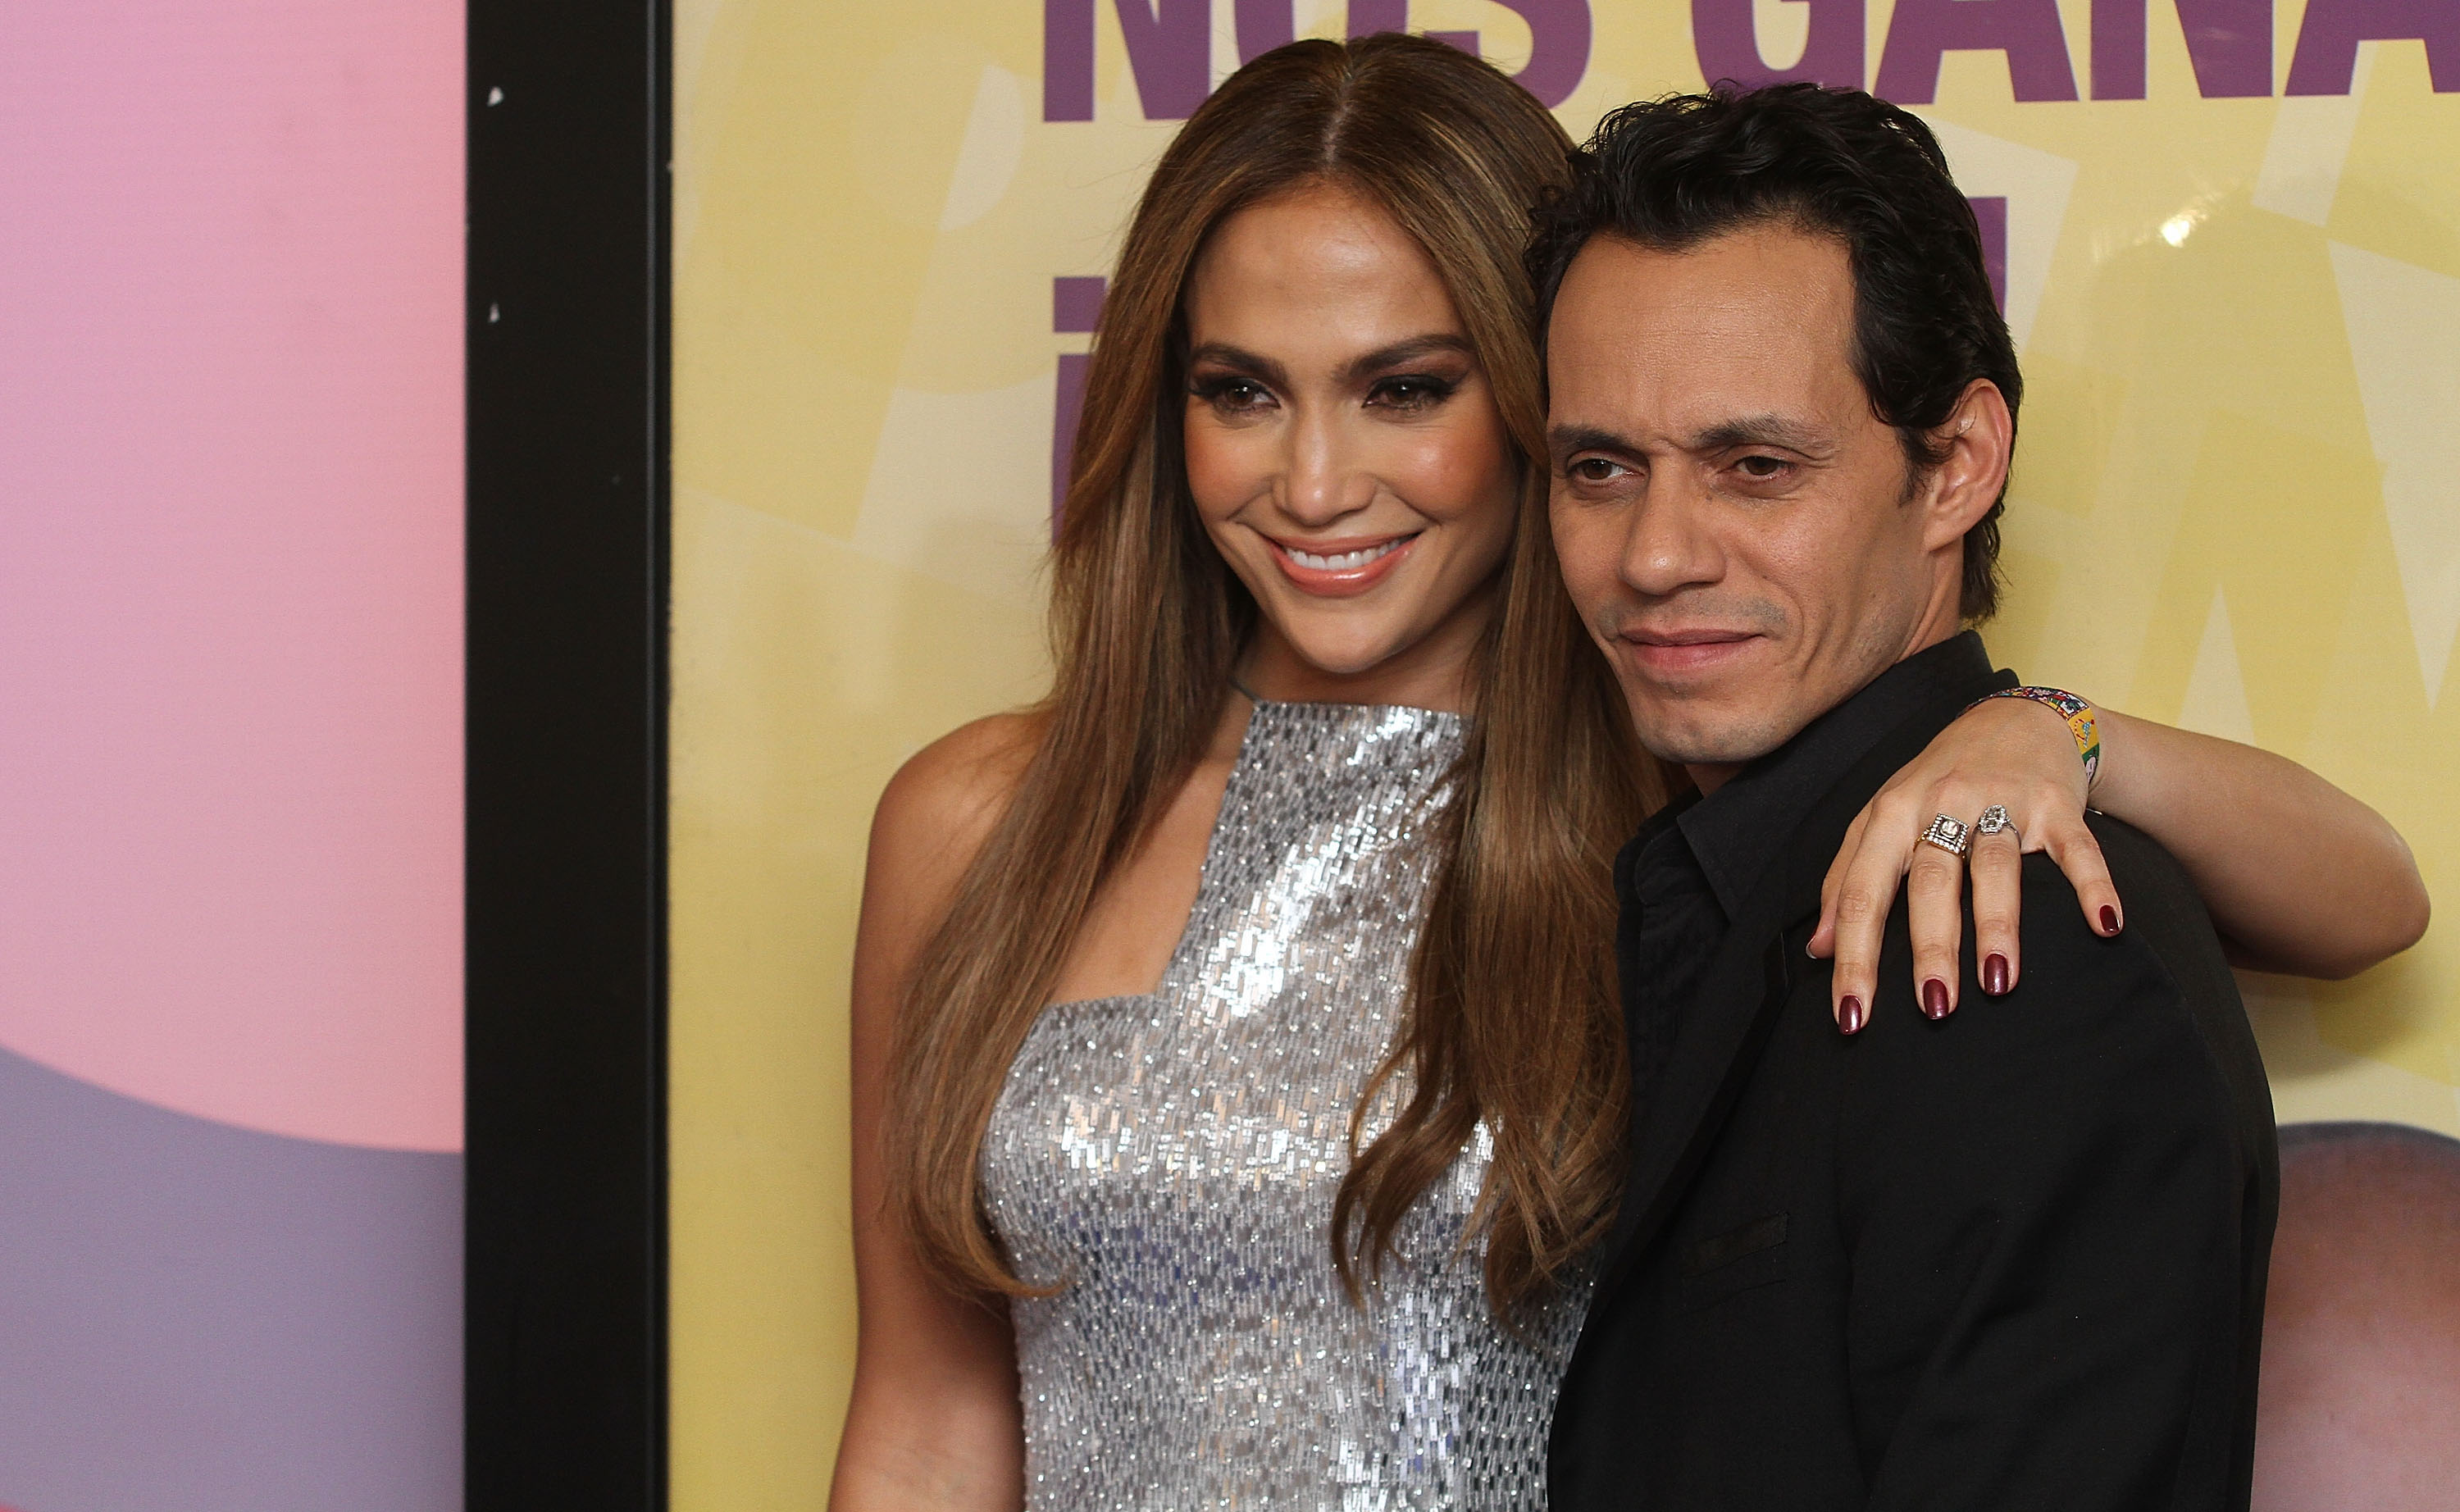 Jennifer Lopez and Marc Anthony attend a press conference during the Teleton 2010 tv broadcast at Televisa San Angel on December 3, 2010, in Mexico City, Mexico. | Source: Getty Images